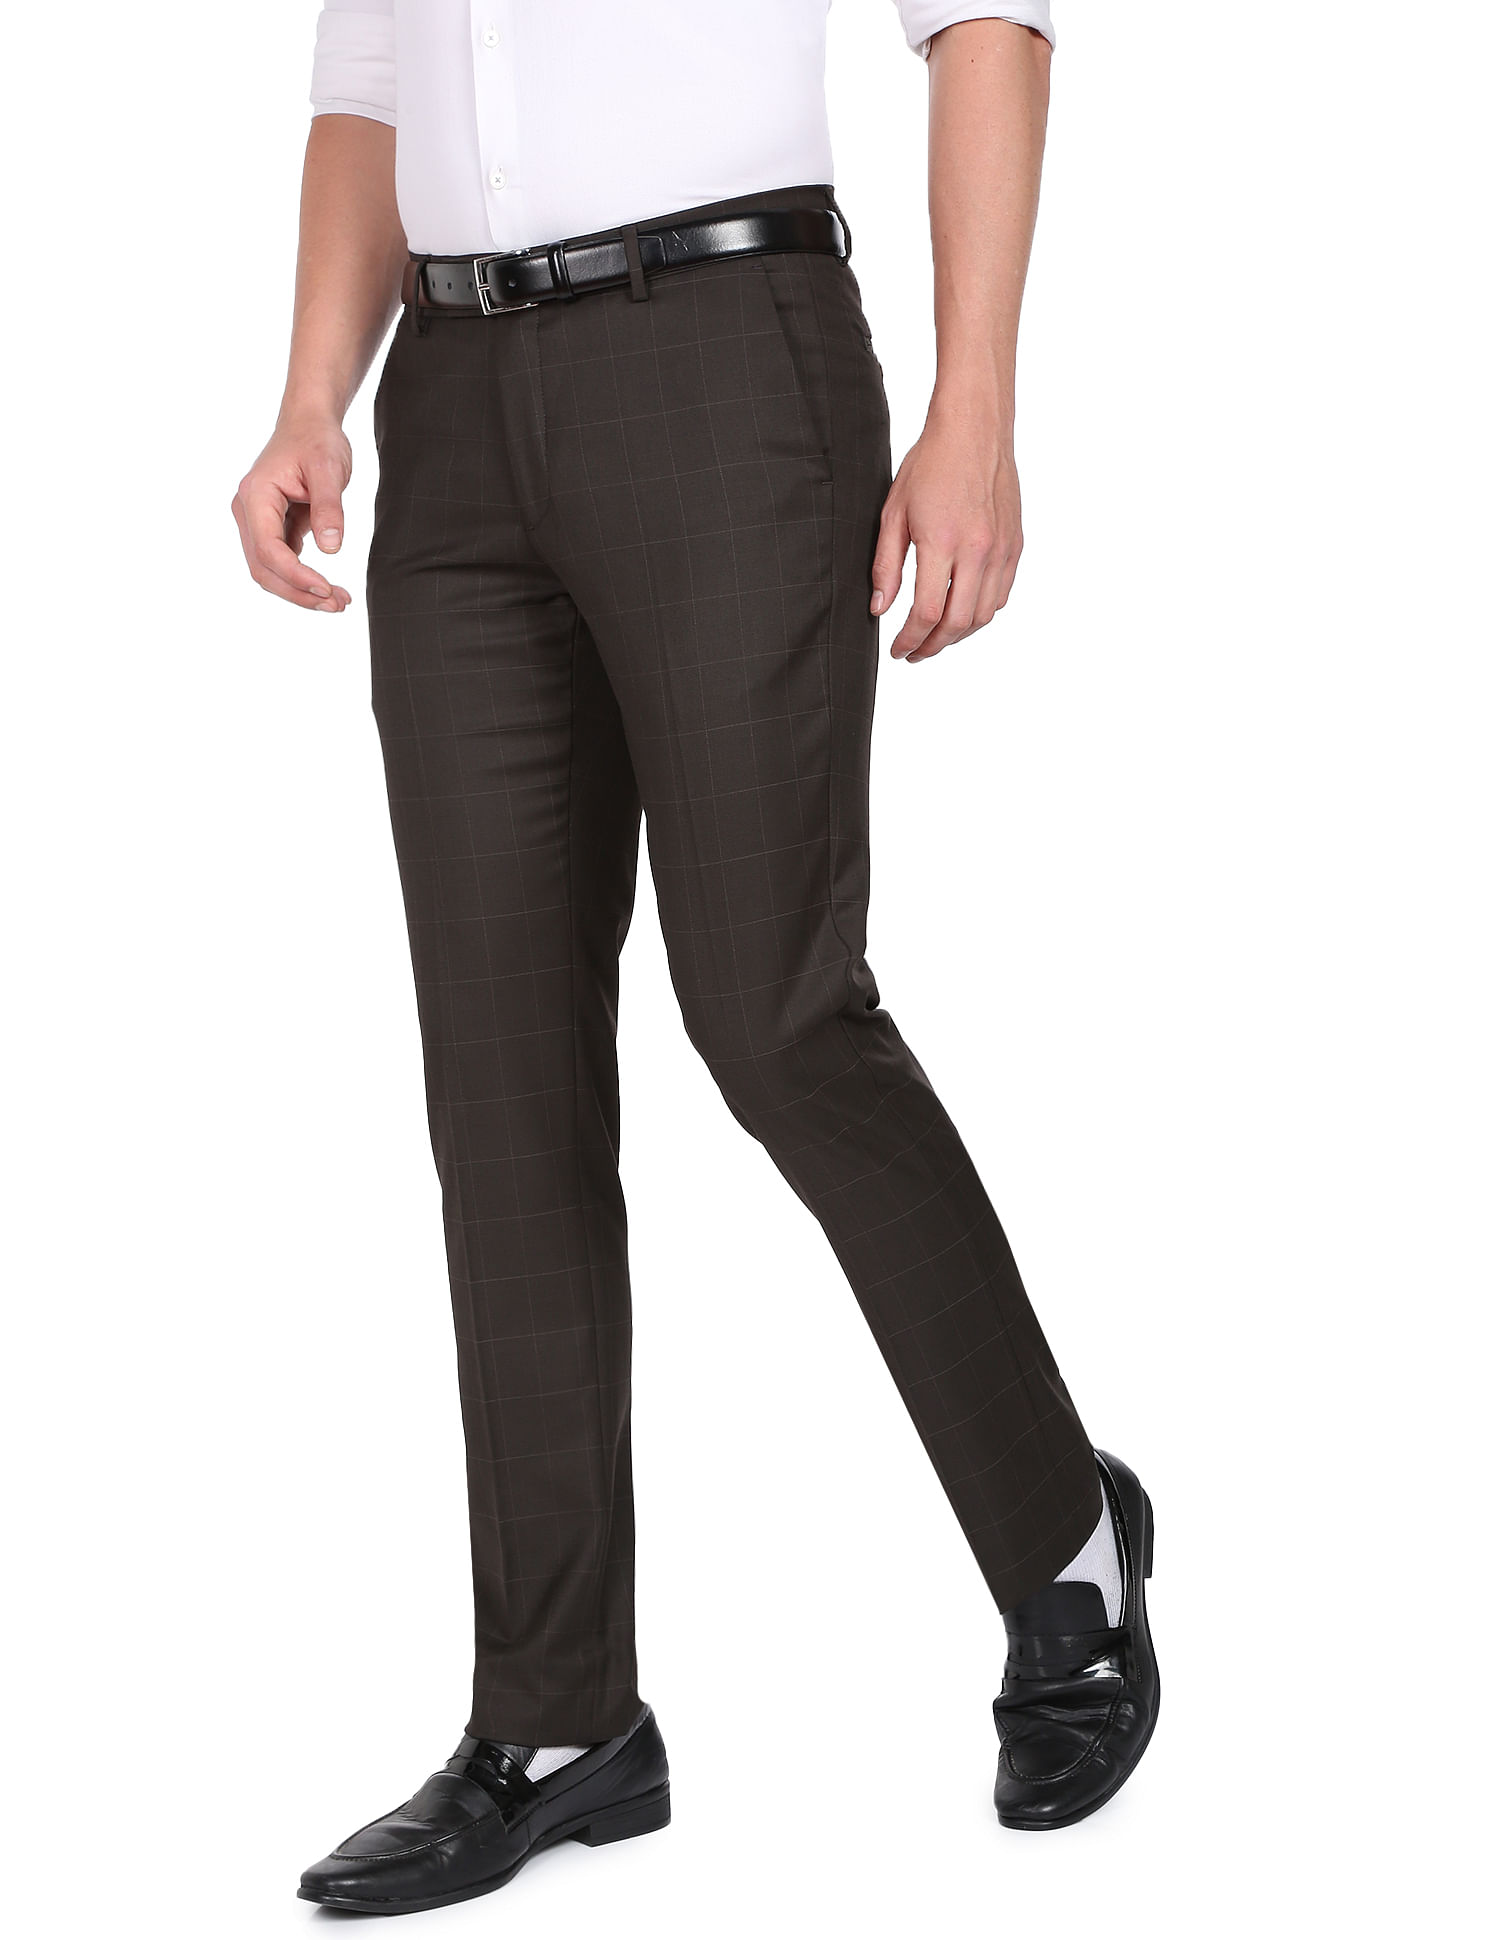 Buy Arrow Formal Trousers Online At Best Price Offers In India